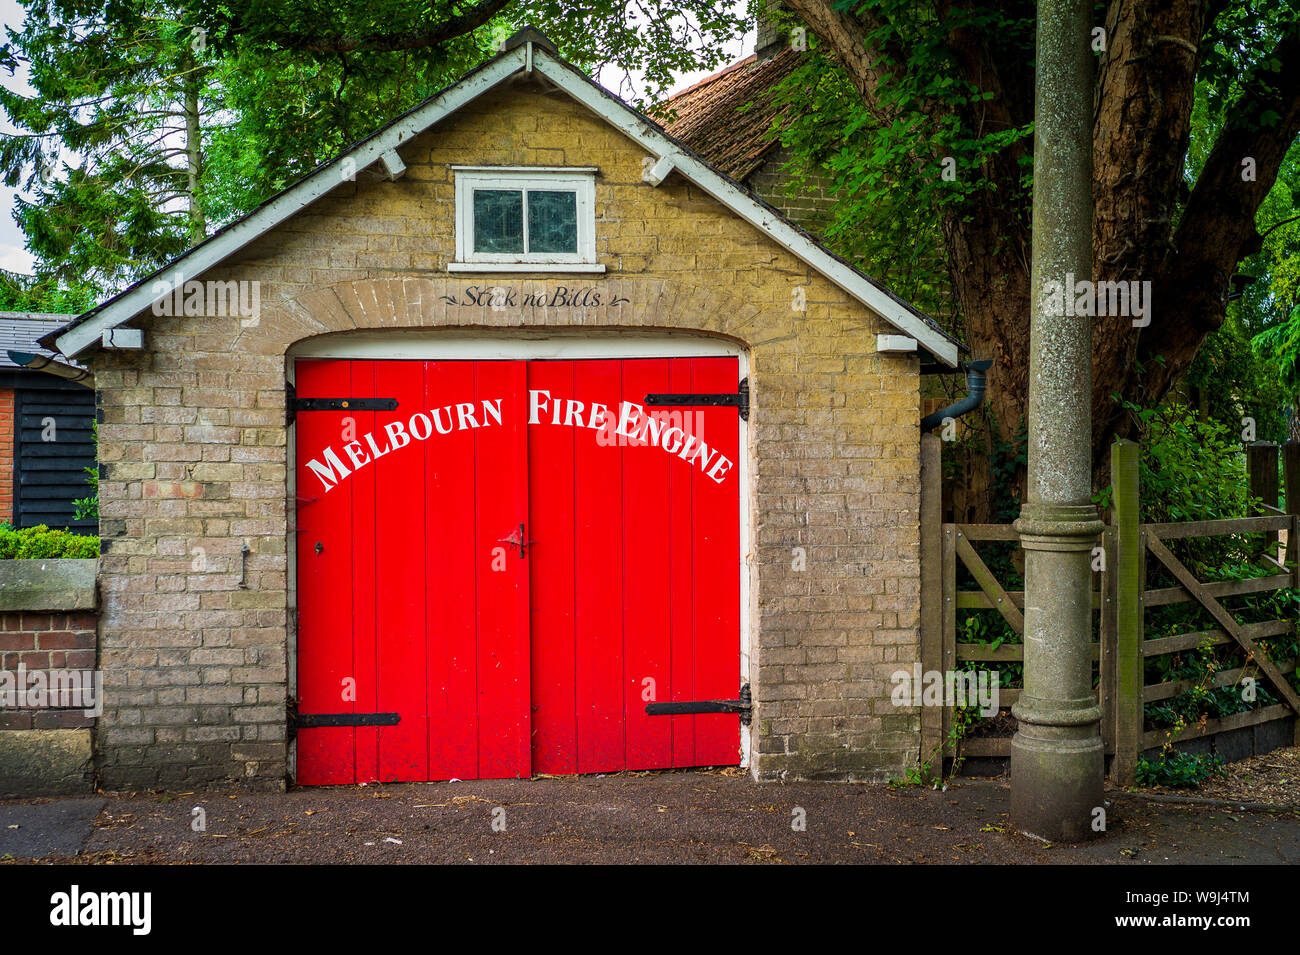 Melbourn Fire Engine Shed Grade II listed, Melbourn Cambridgeshire UK. Built in 1862 to house a parish fire engine bought by subscription Stock Photo